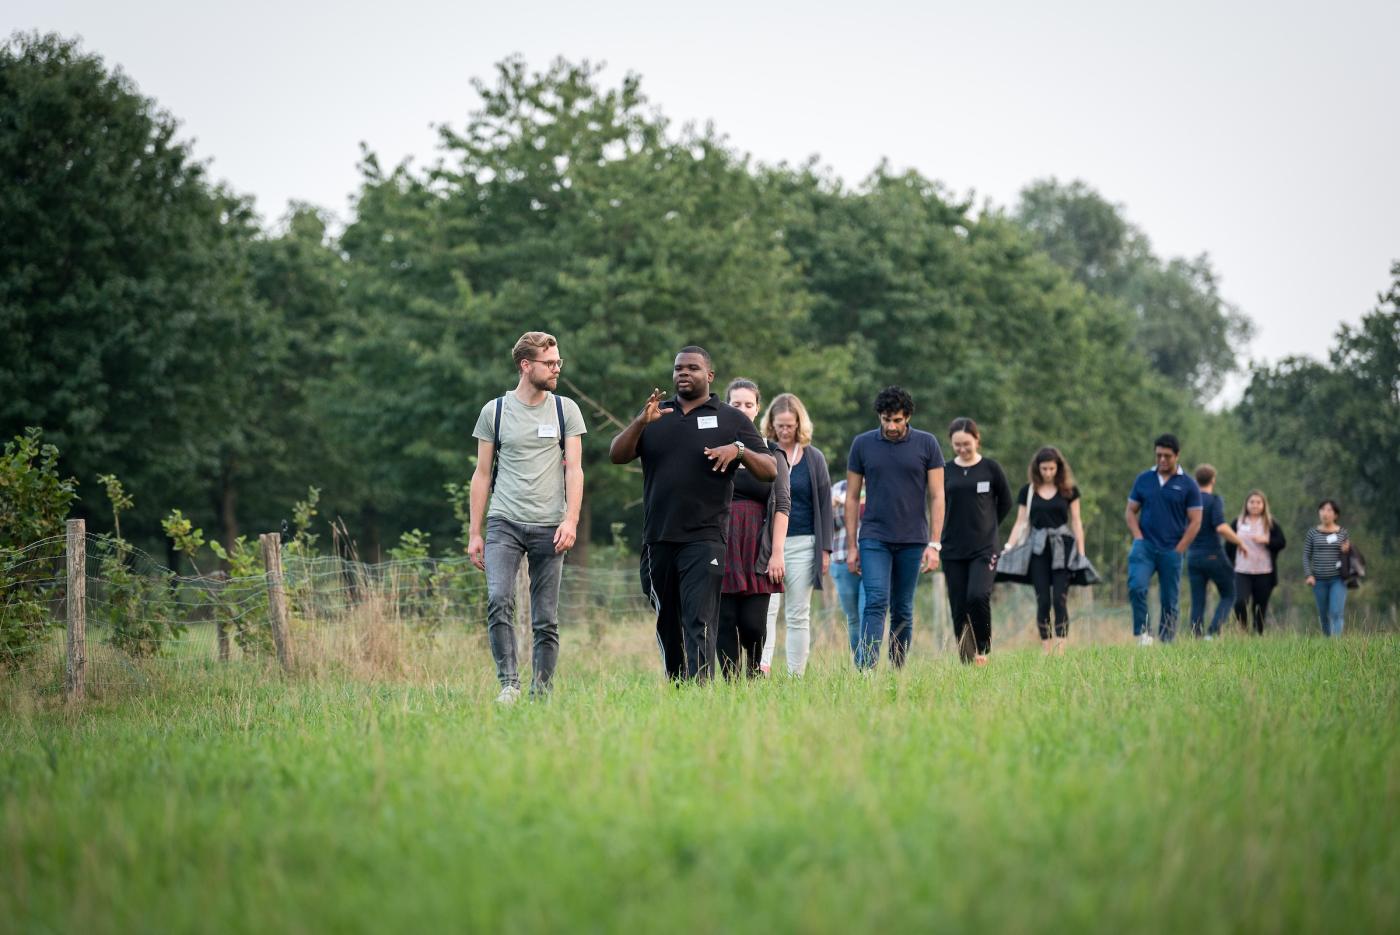 De Glind, Netherlands: Through a Pilgrim Walk, youth participants explore what it means to be on a Pilgrimage of Justice and Peace